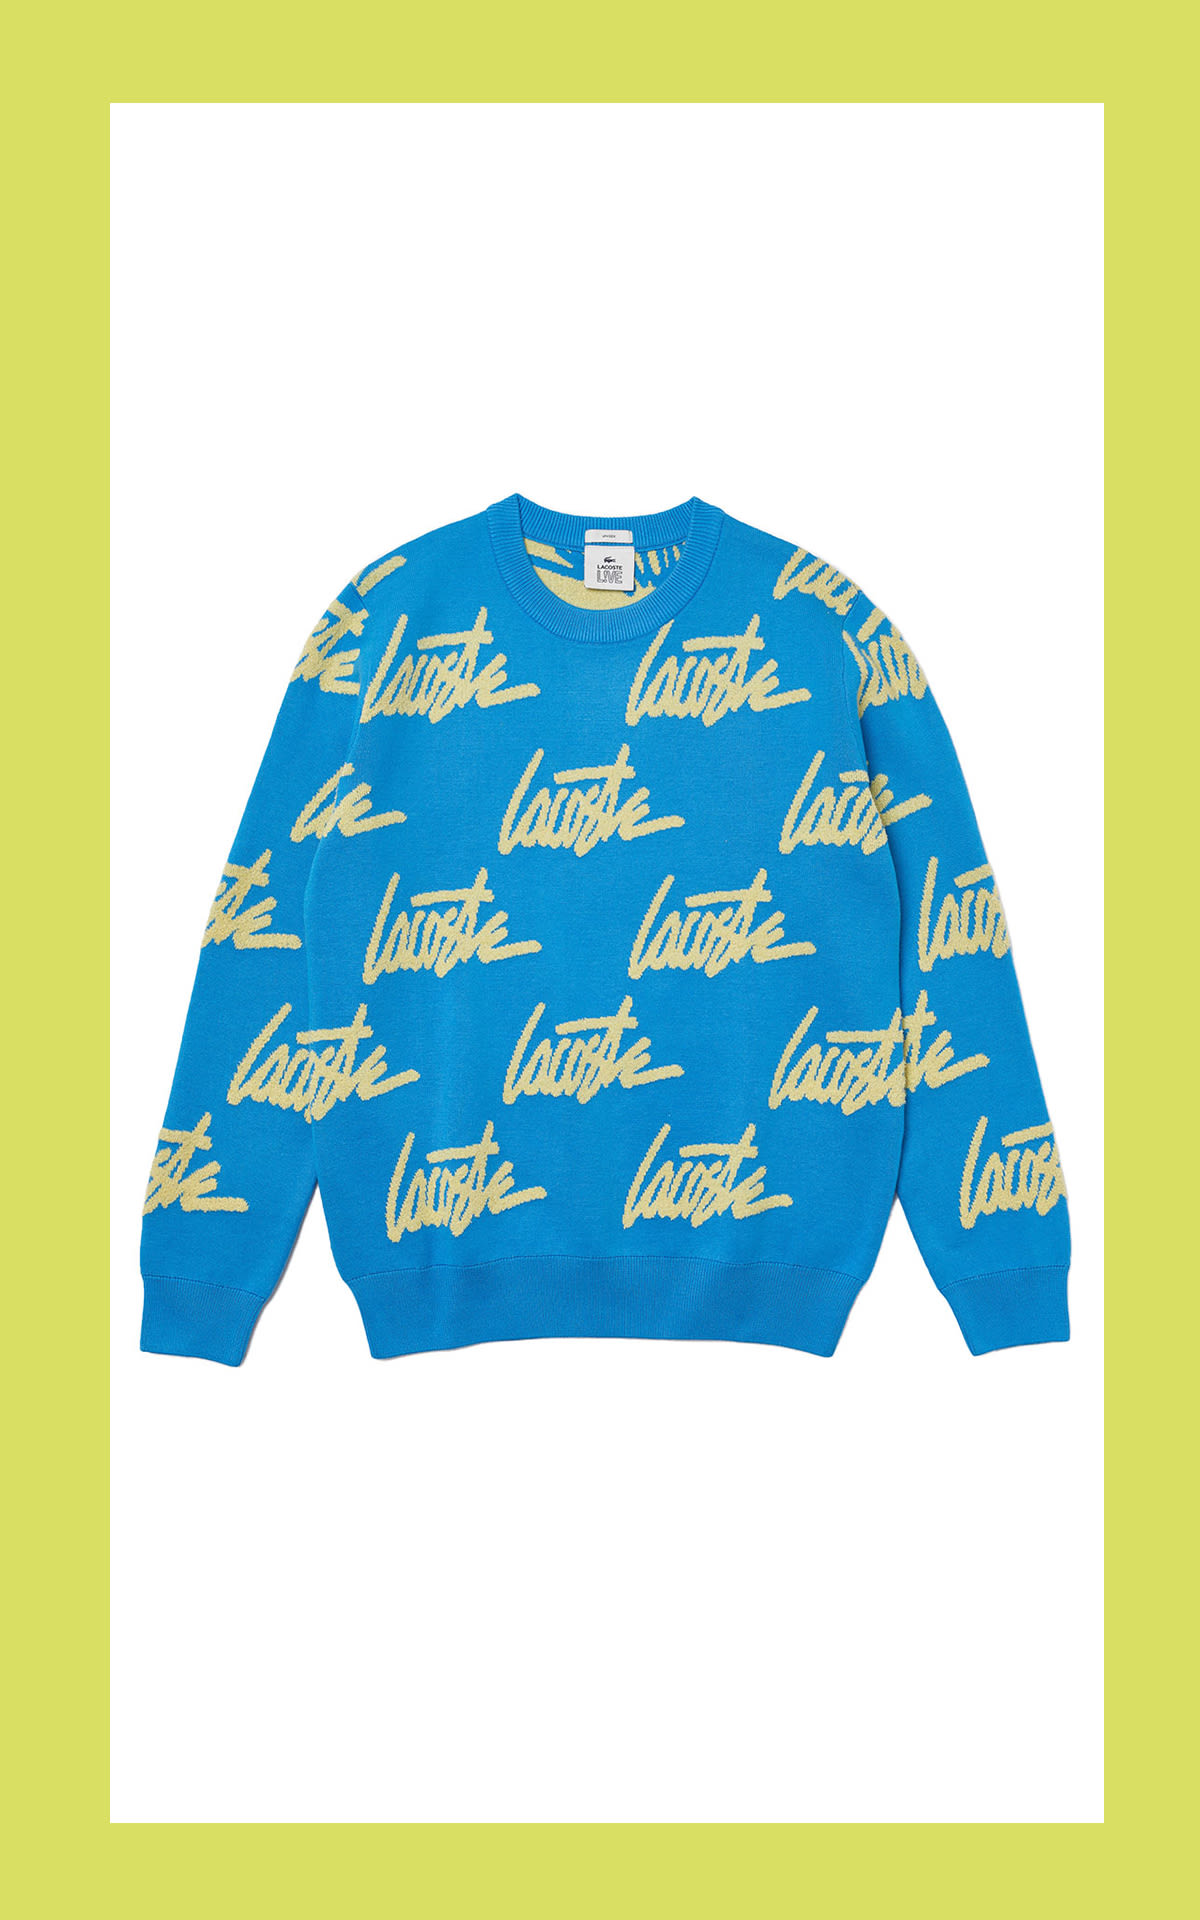 Blue sweater with brand logo Lacoste